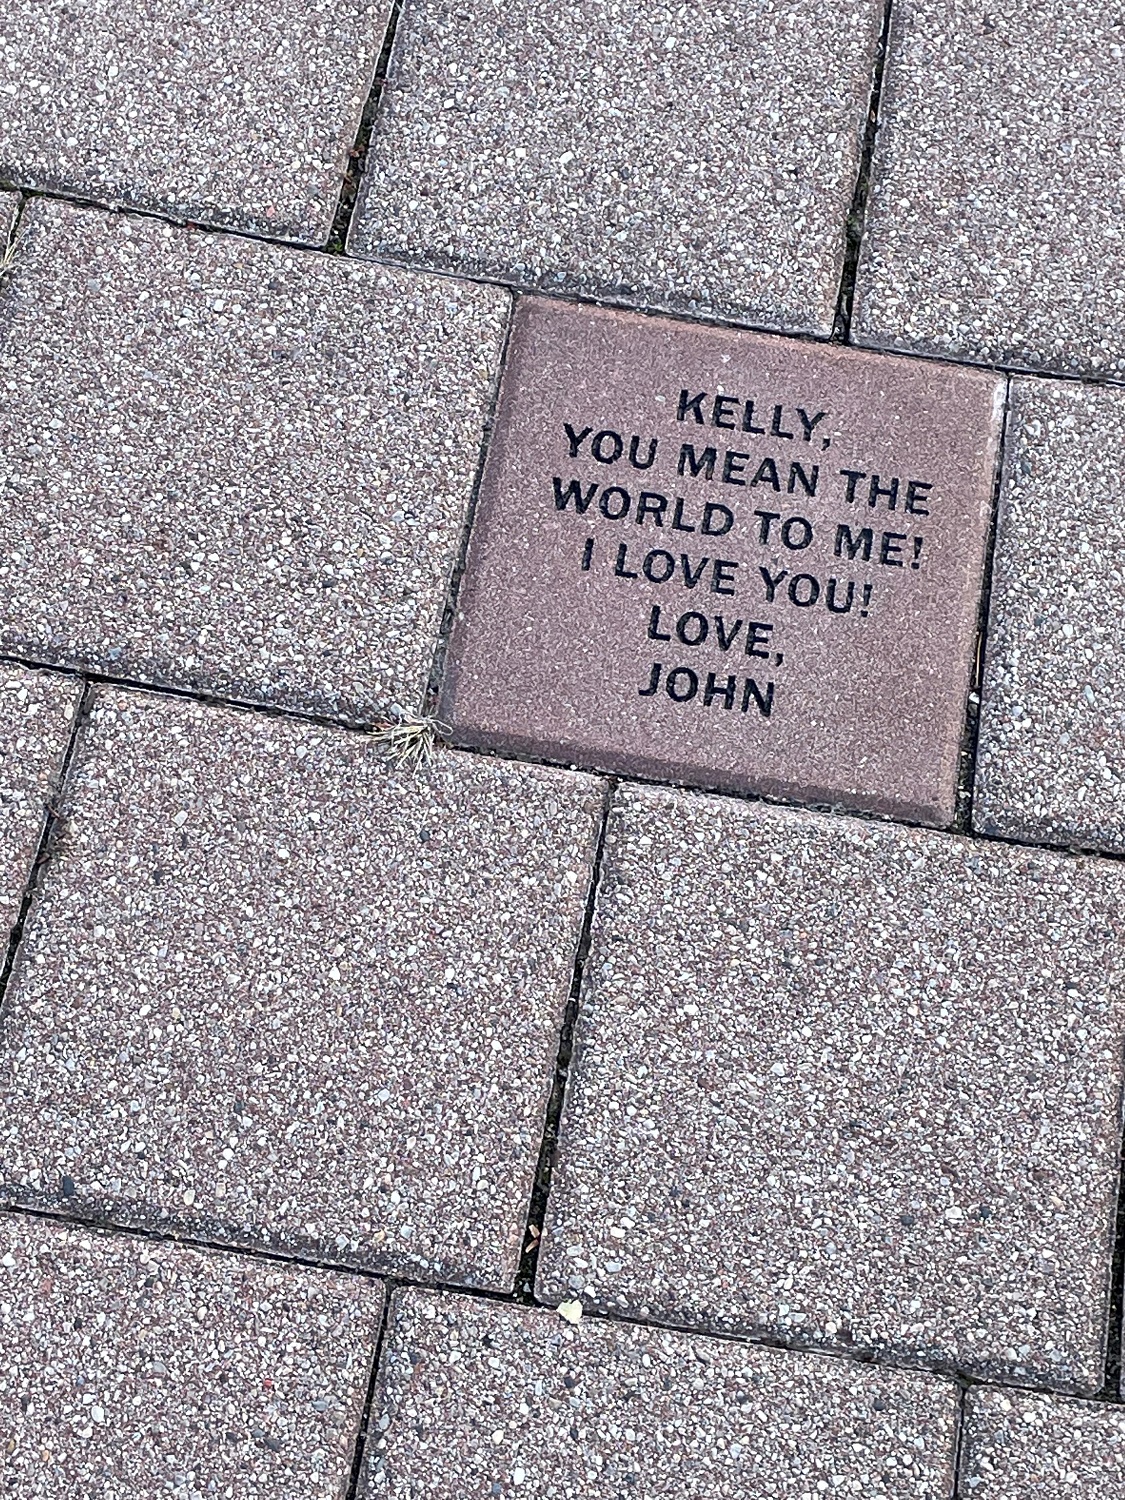 Sample of an 8-inch by 8-inch commemorative brick. Text says, "Kelly you mean the world to me. I love you! John"